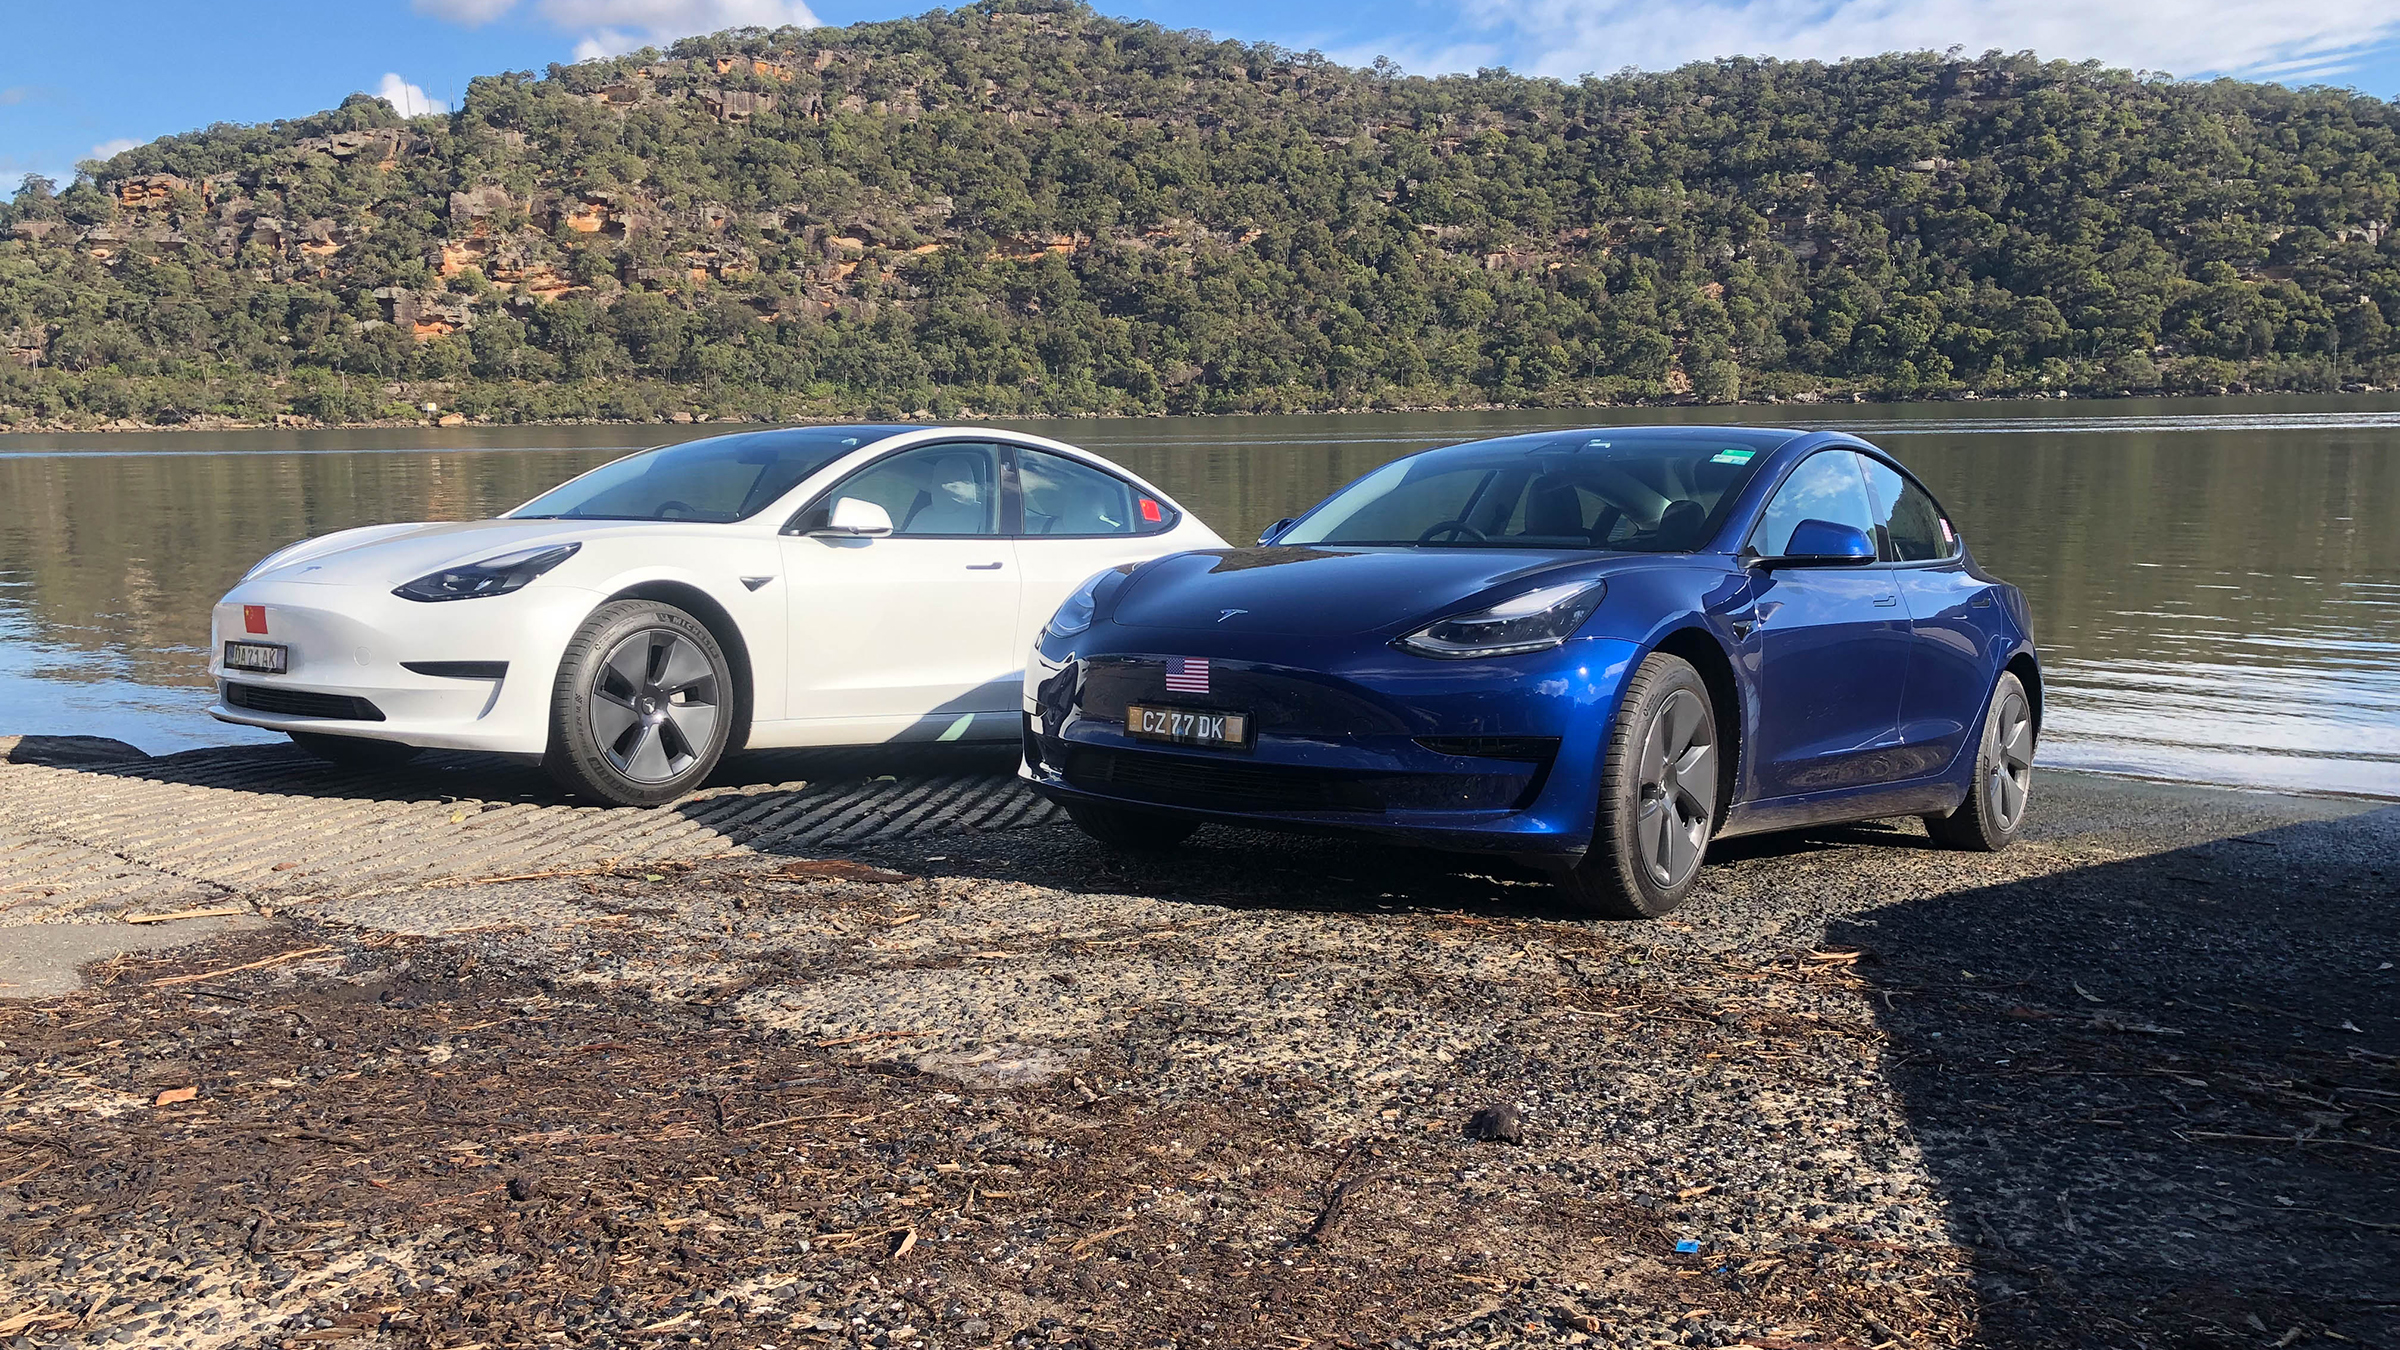 Teslas made in China versus the USA: What's the difference? The